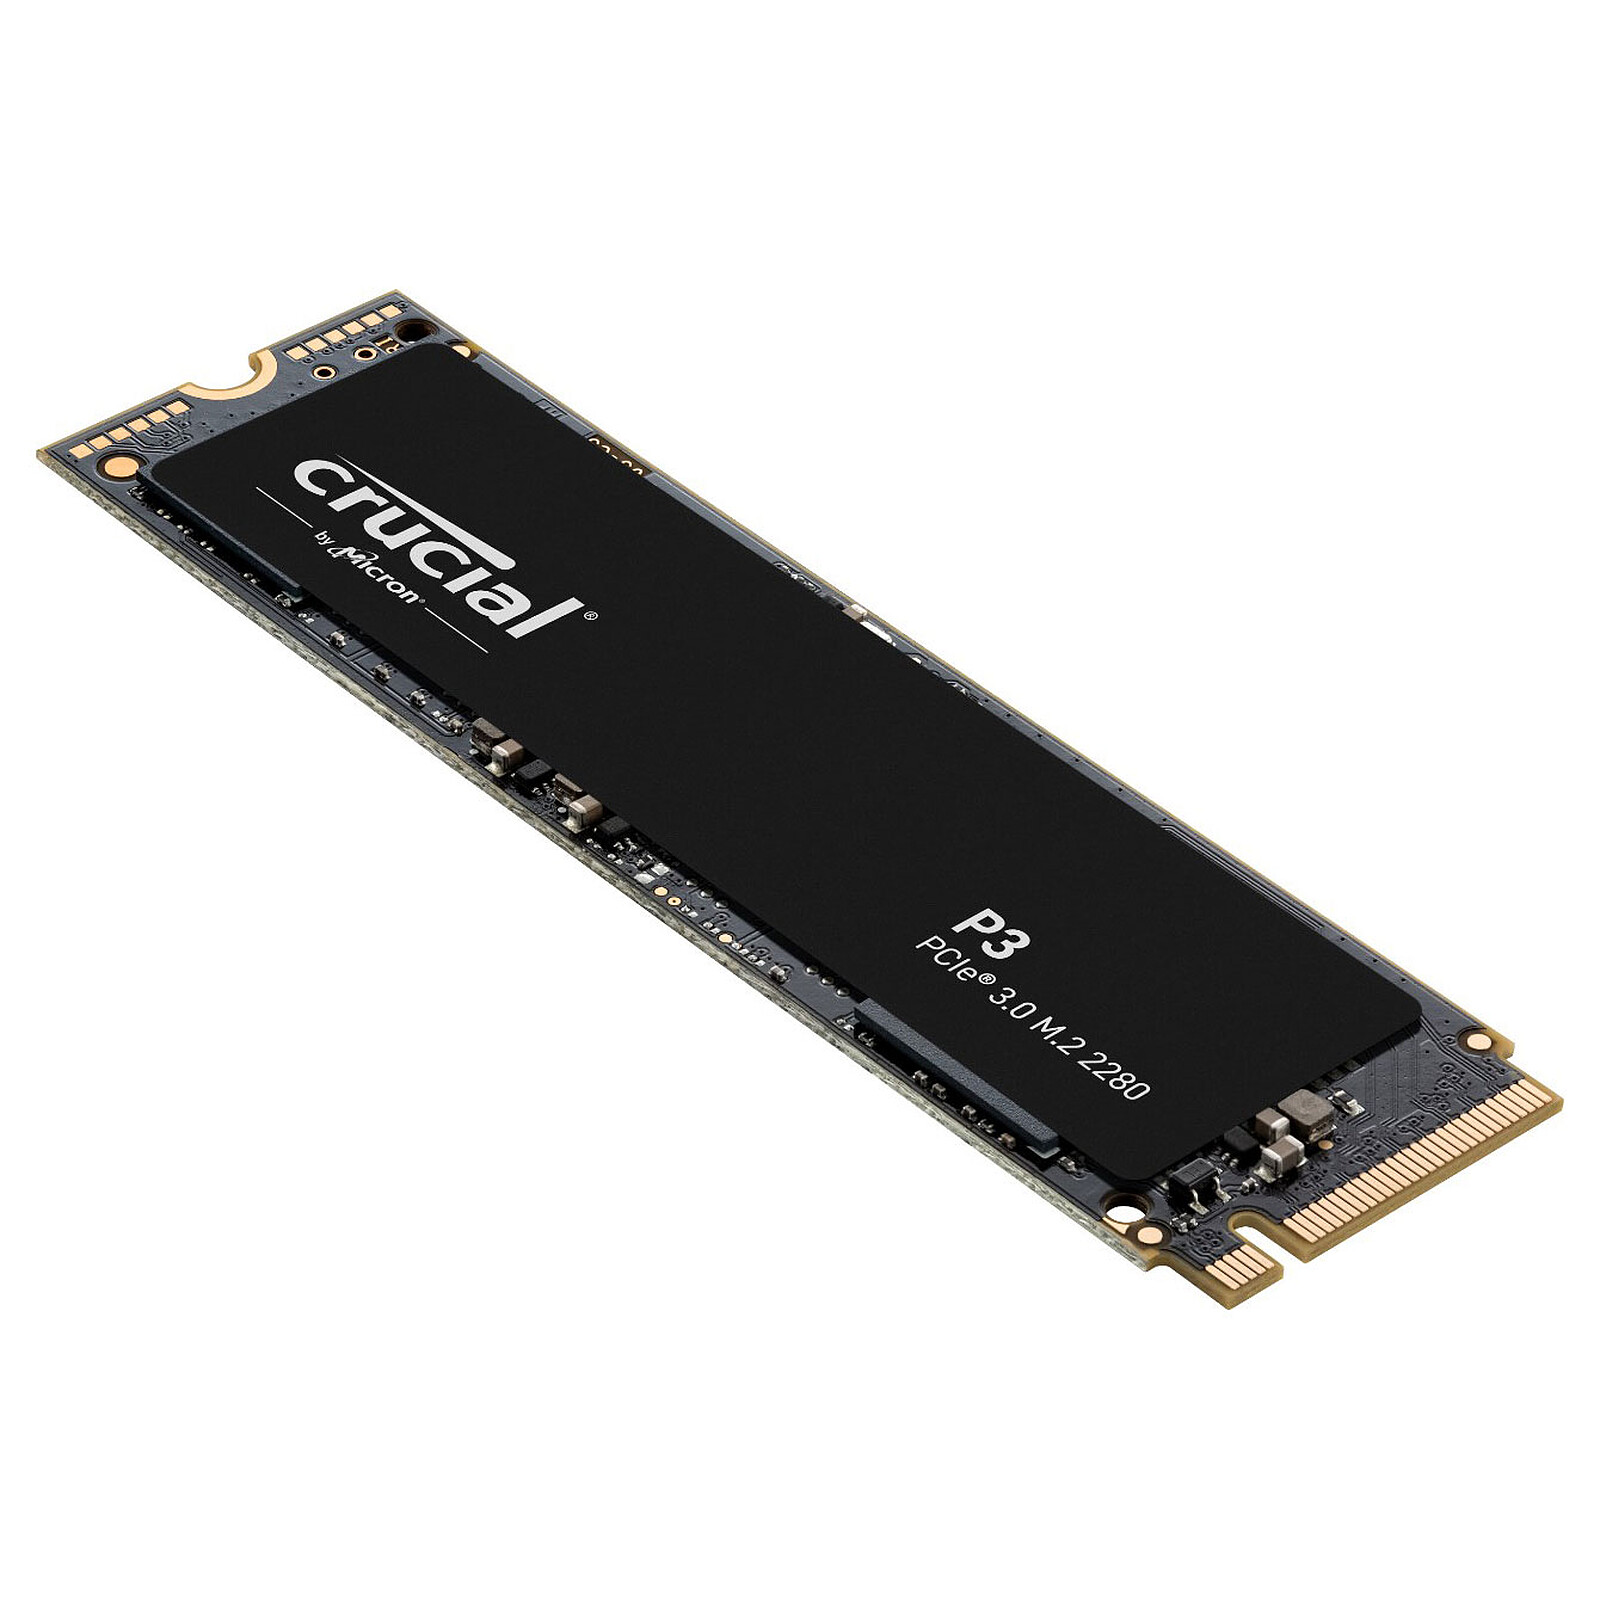 Crucial disque 2,5 SSD BX500 1 To SATA 3D NAND - Disque SSD - CRUCIAL